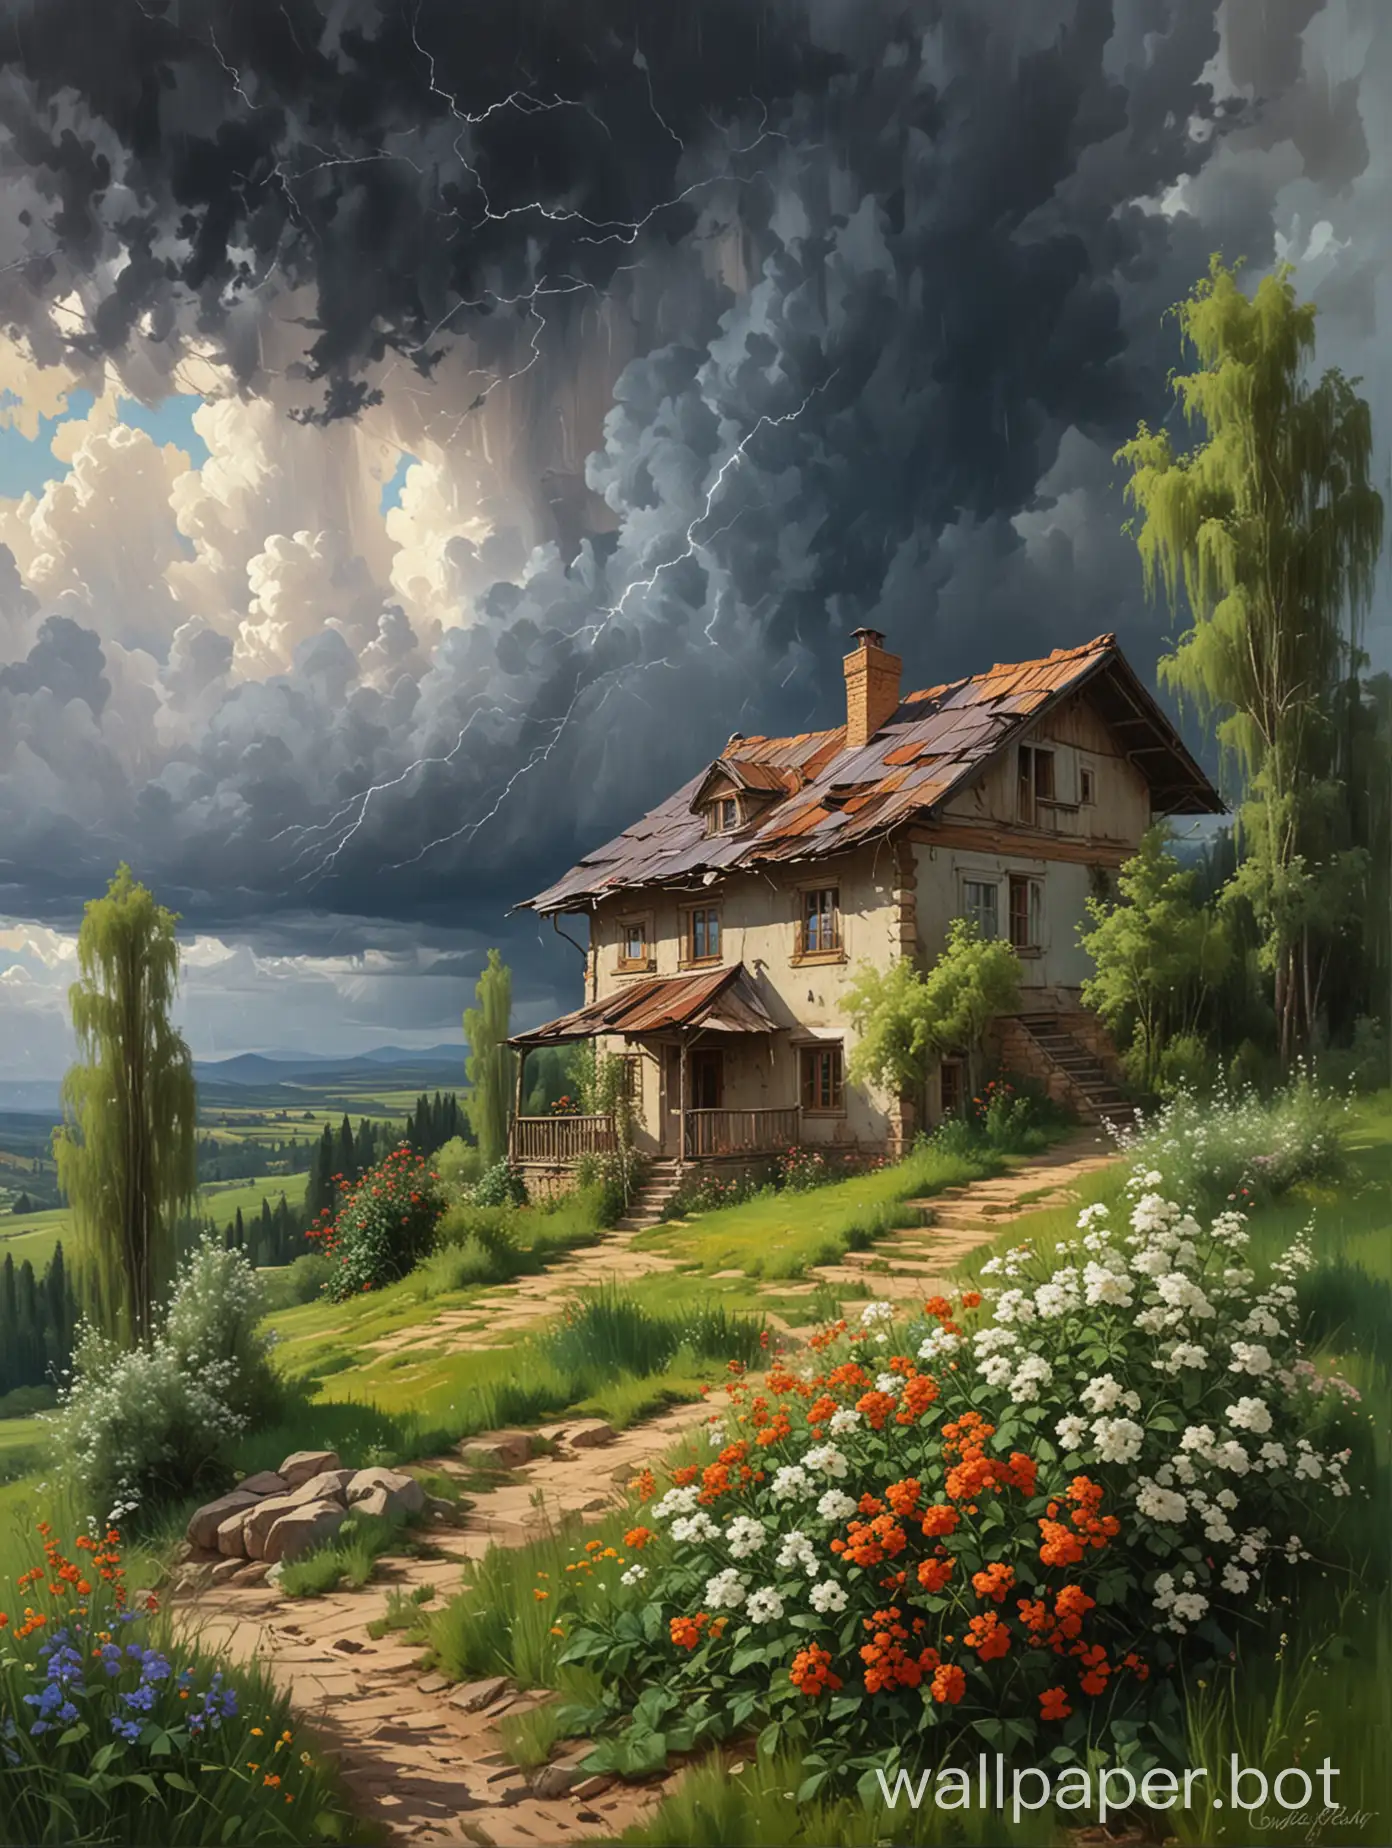 Vladimir-Gusev-Oil-Painting-Dark-Clouds-with-Lightnings-and-Old-House-in-Natural-Landscape